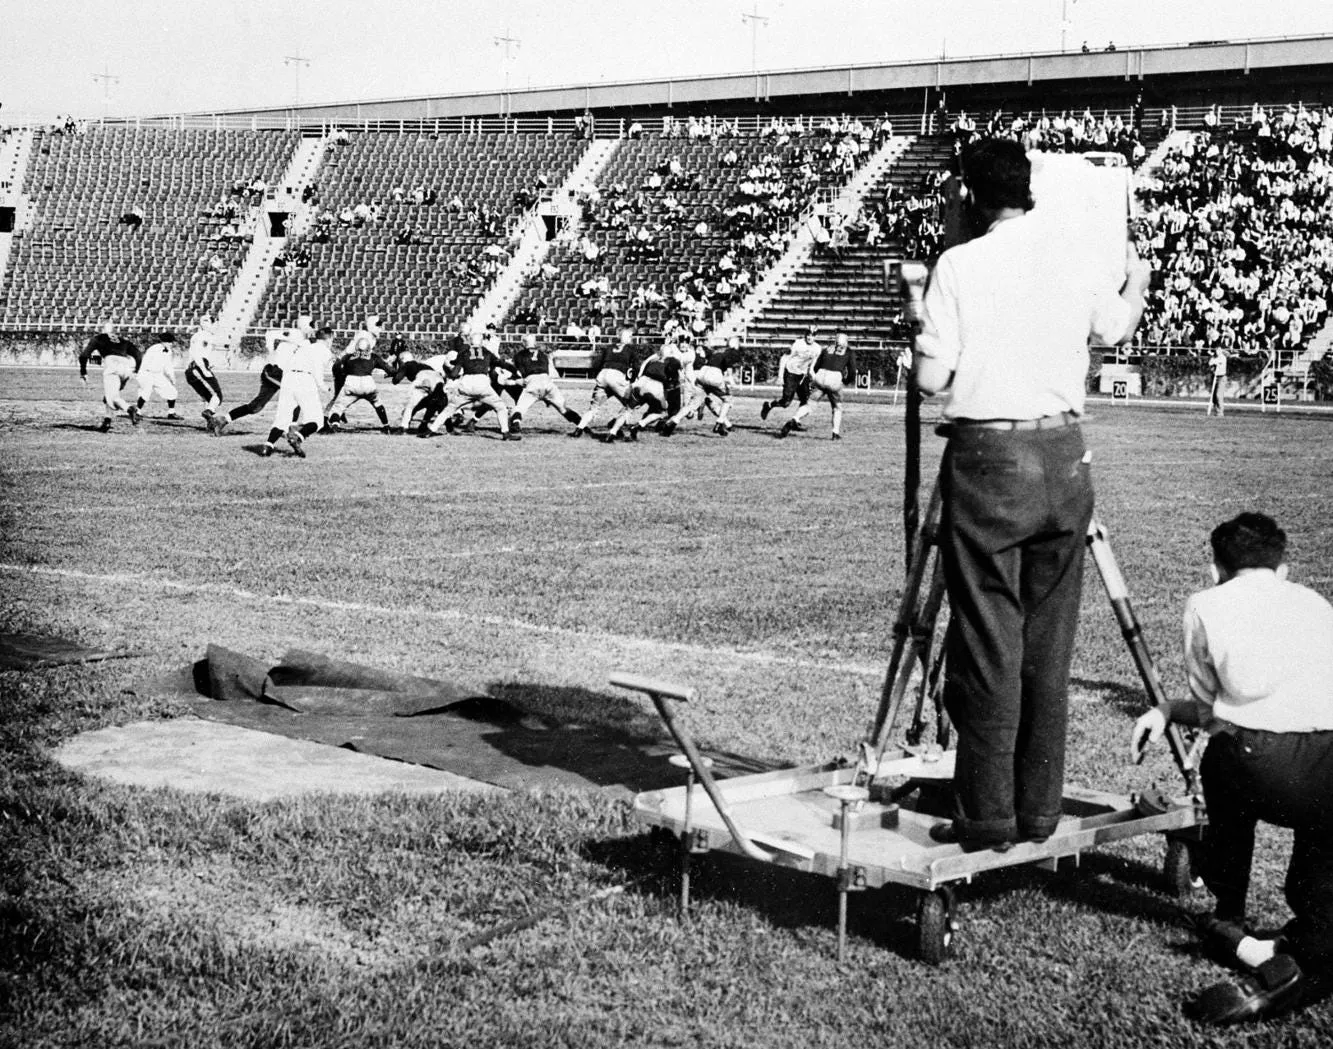 A photo from the period depicting a camera crow recording a set of footballers right as the game starts, with a modest crowd in the stands.